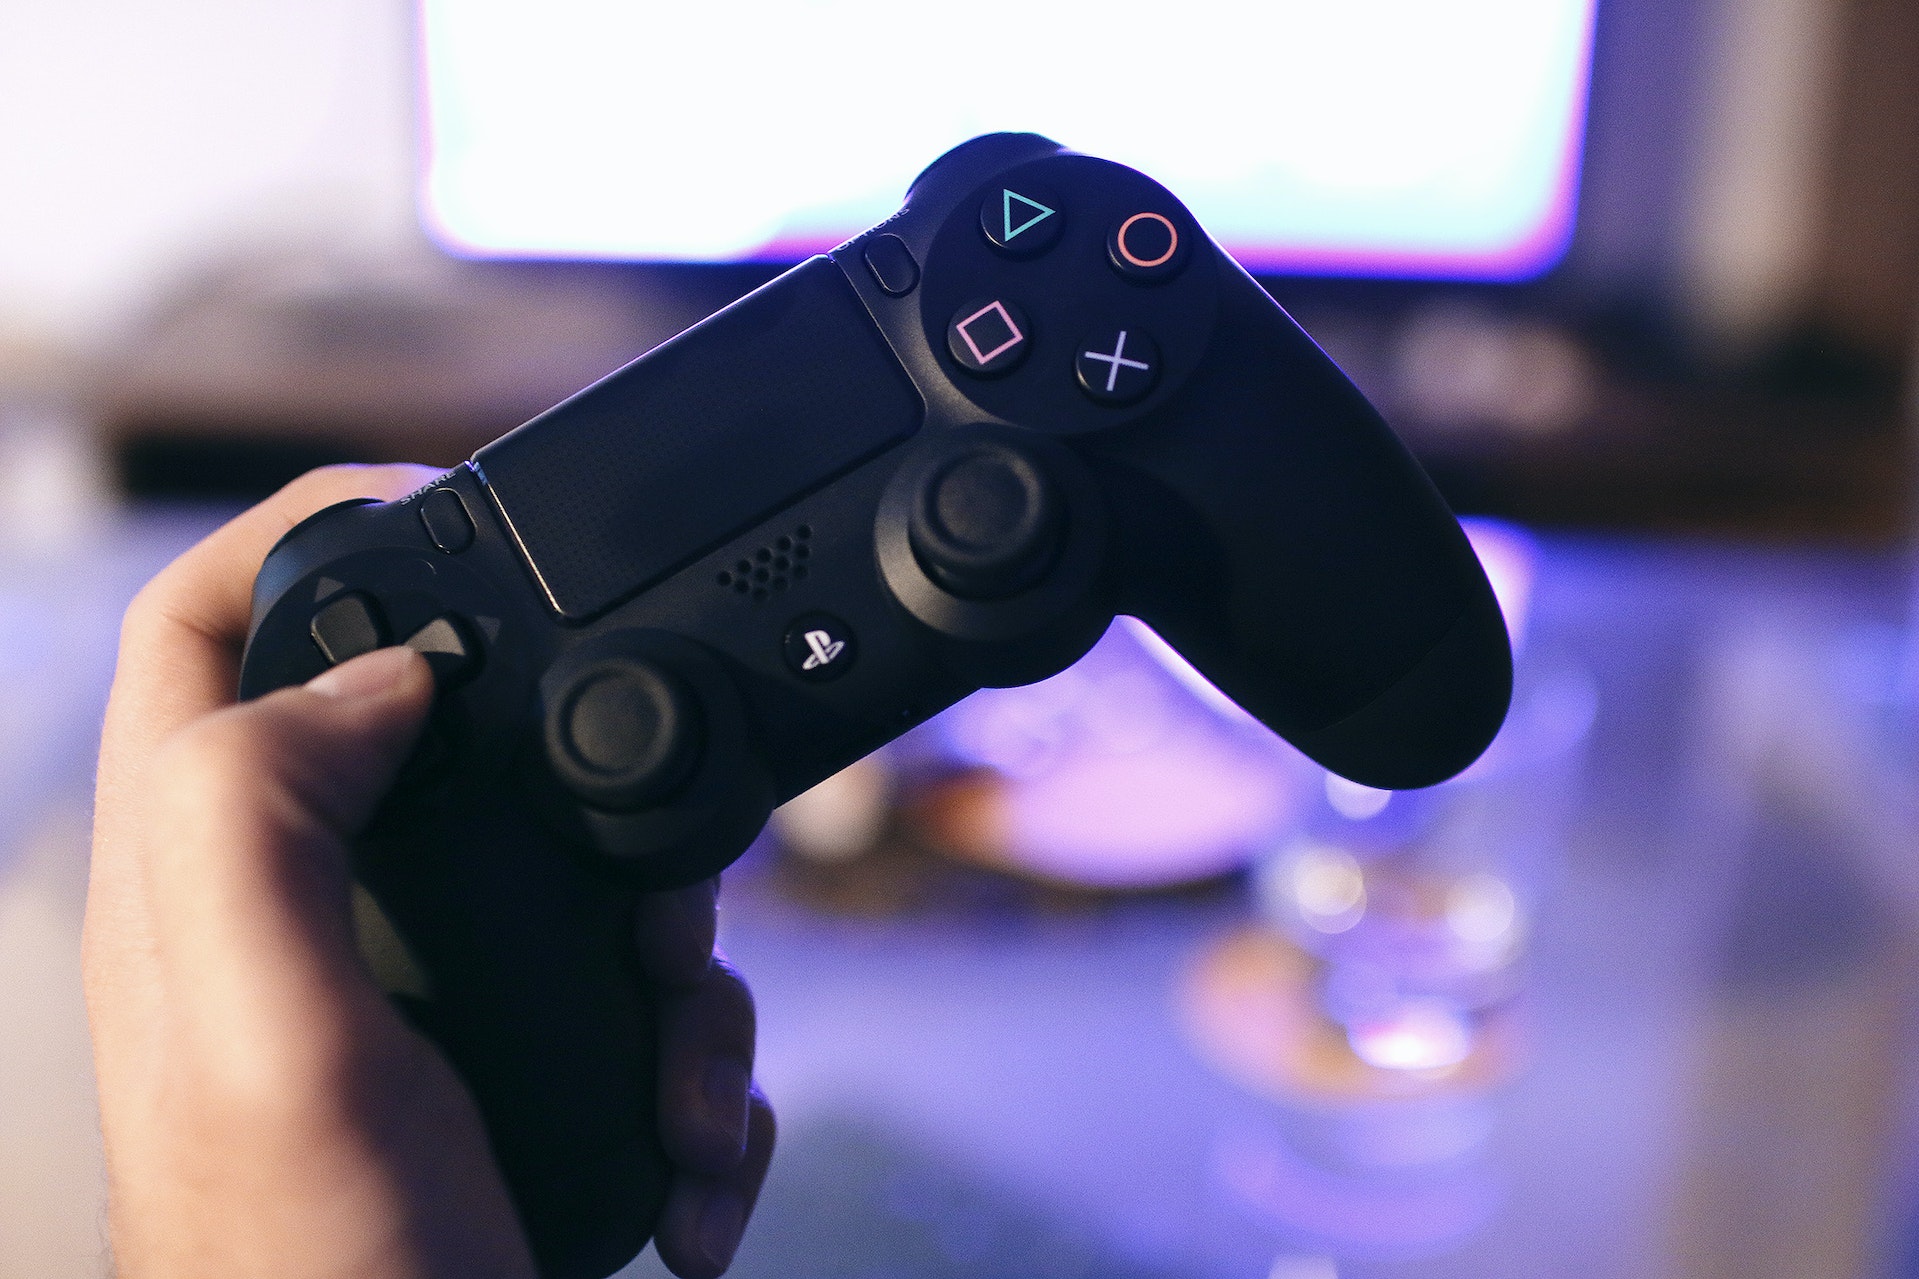 A person holding a PlayStation controller | Source: Pexels